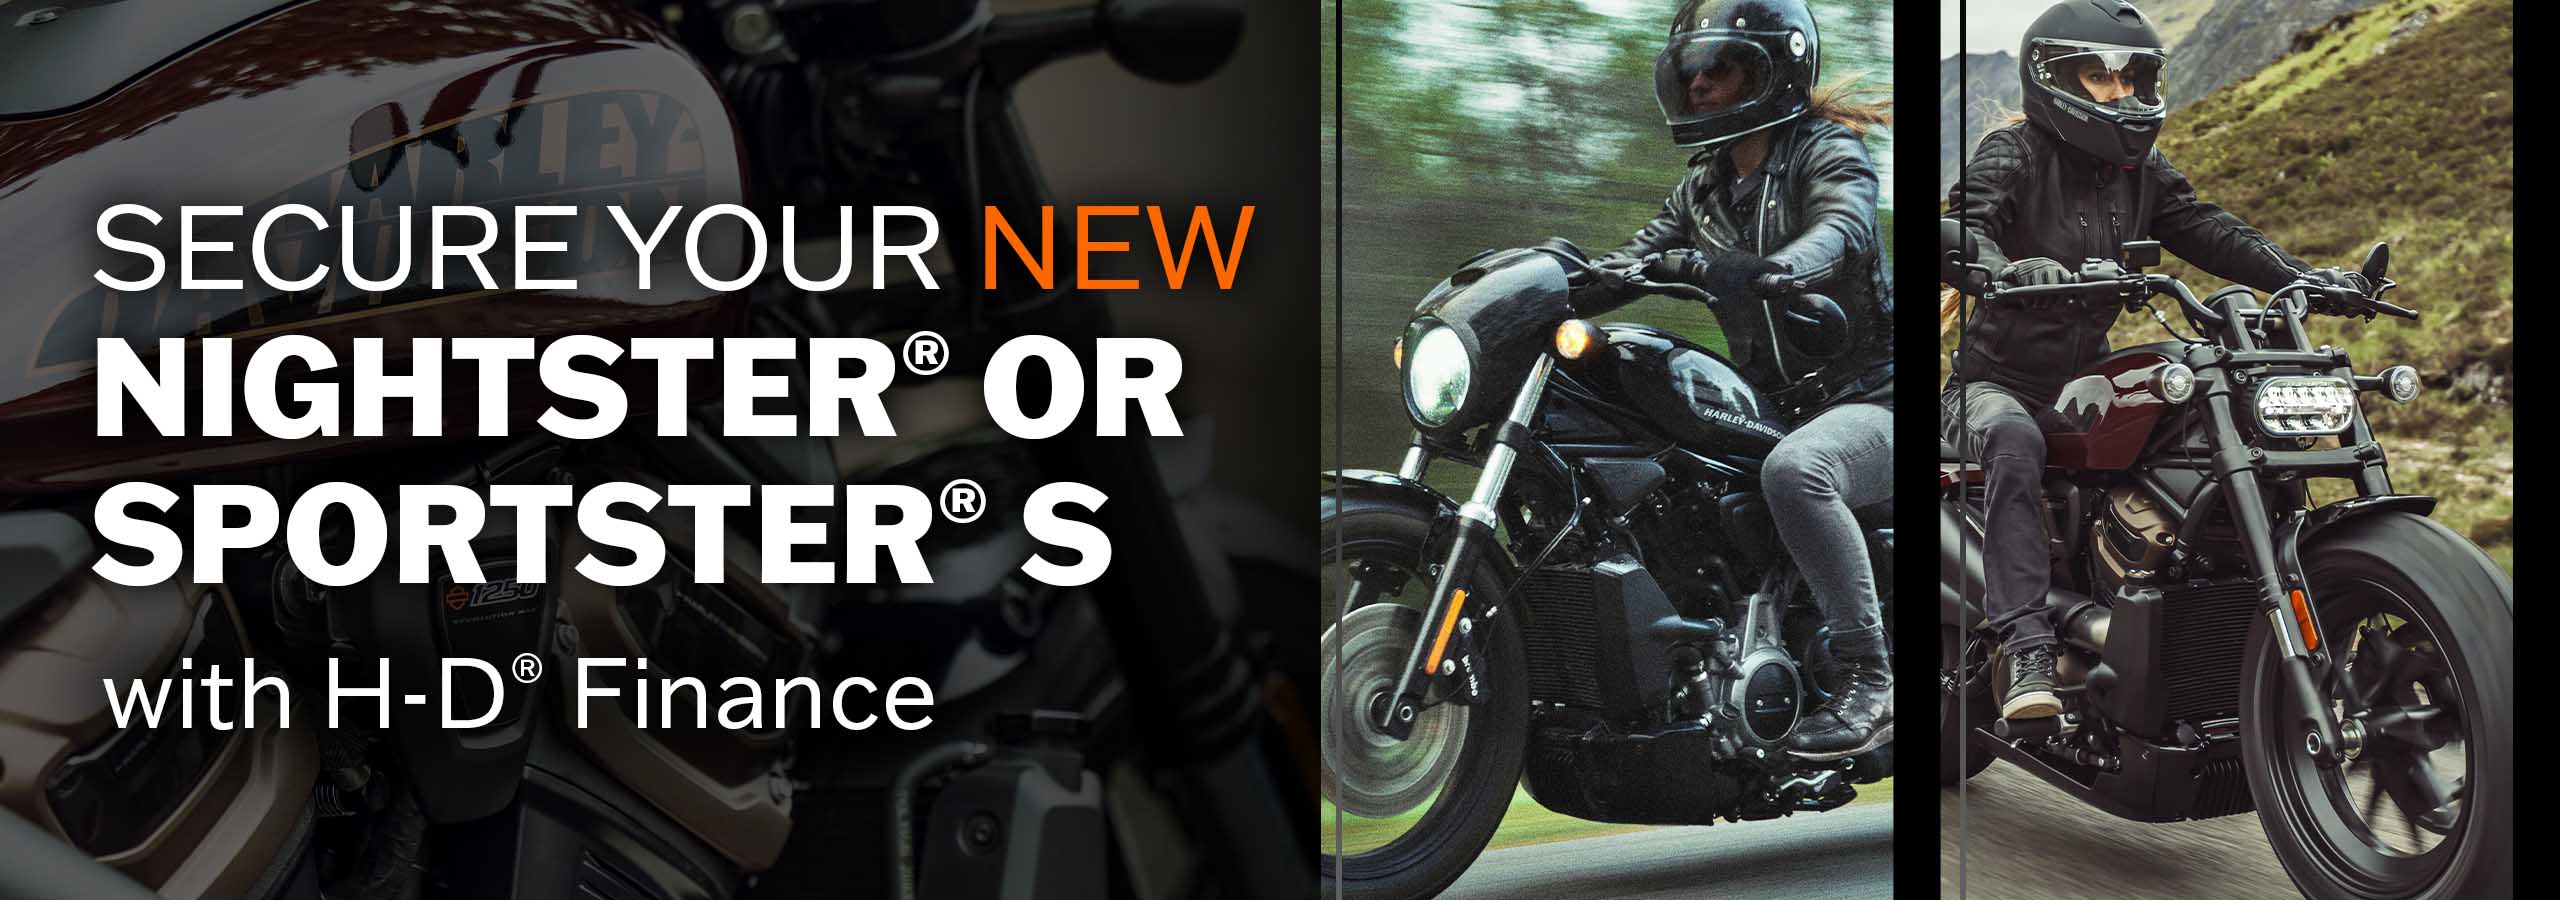 The Nightster and Sportster S available at Maidstone Harley-Davidson with monthly payments on H-D Finance